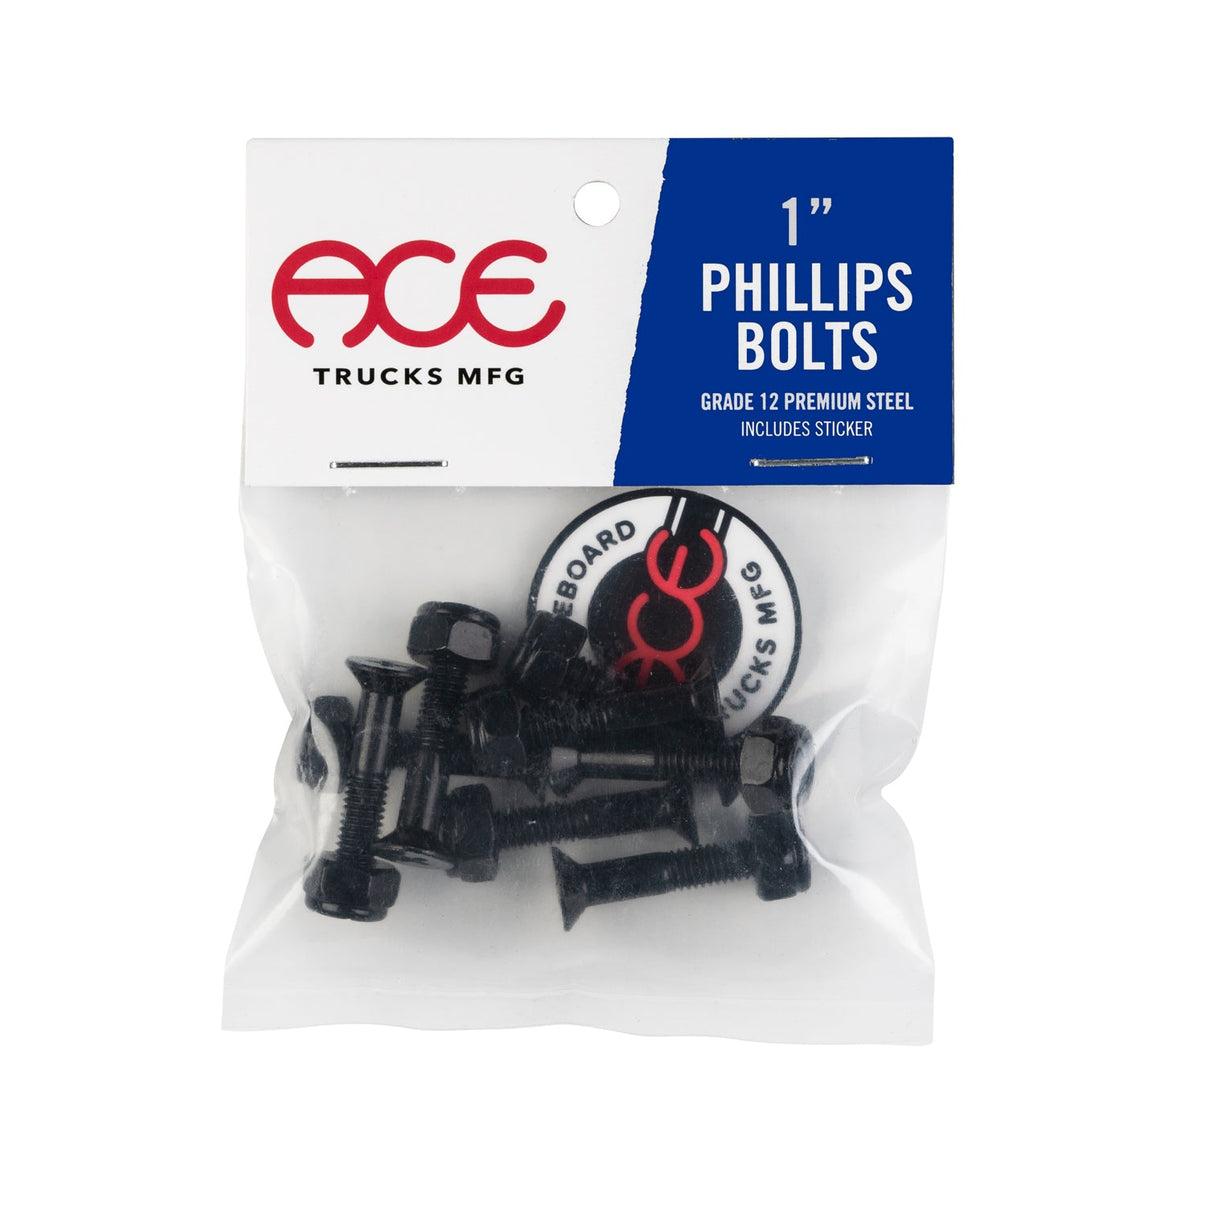 Ace 1" Phillips Bolts